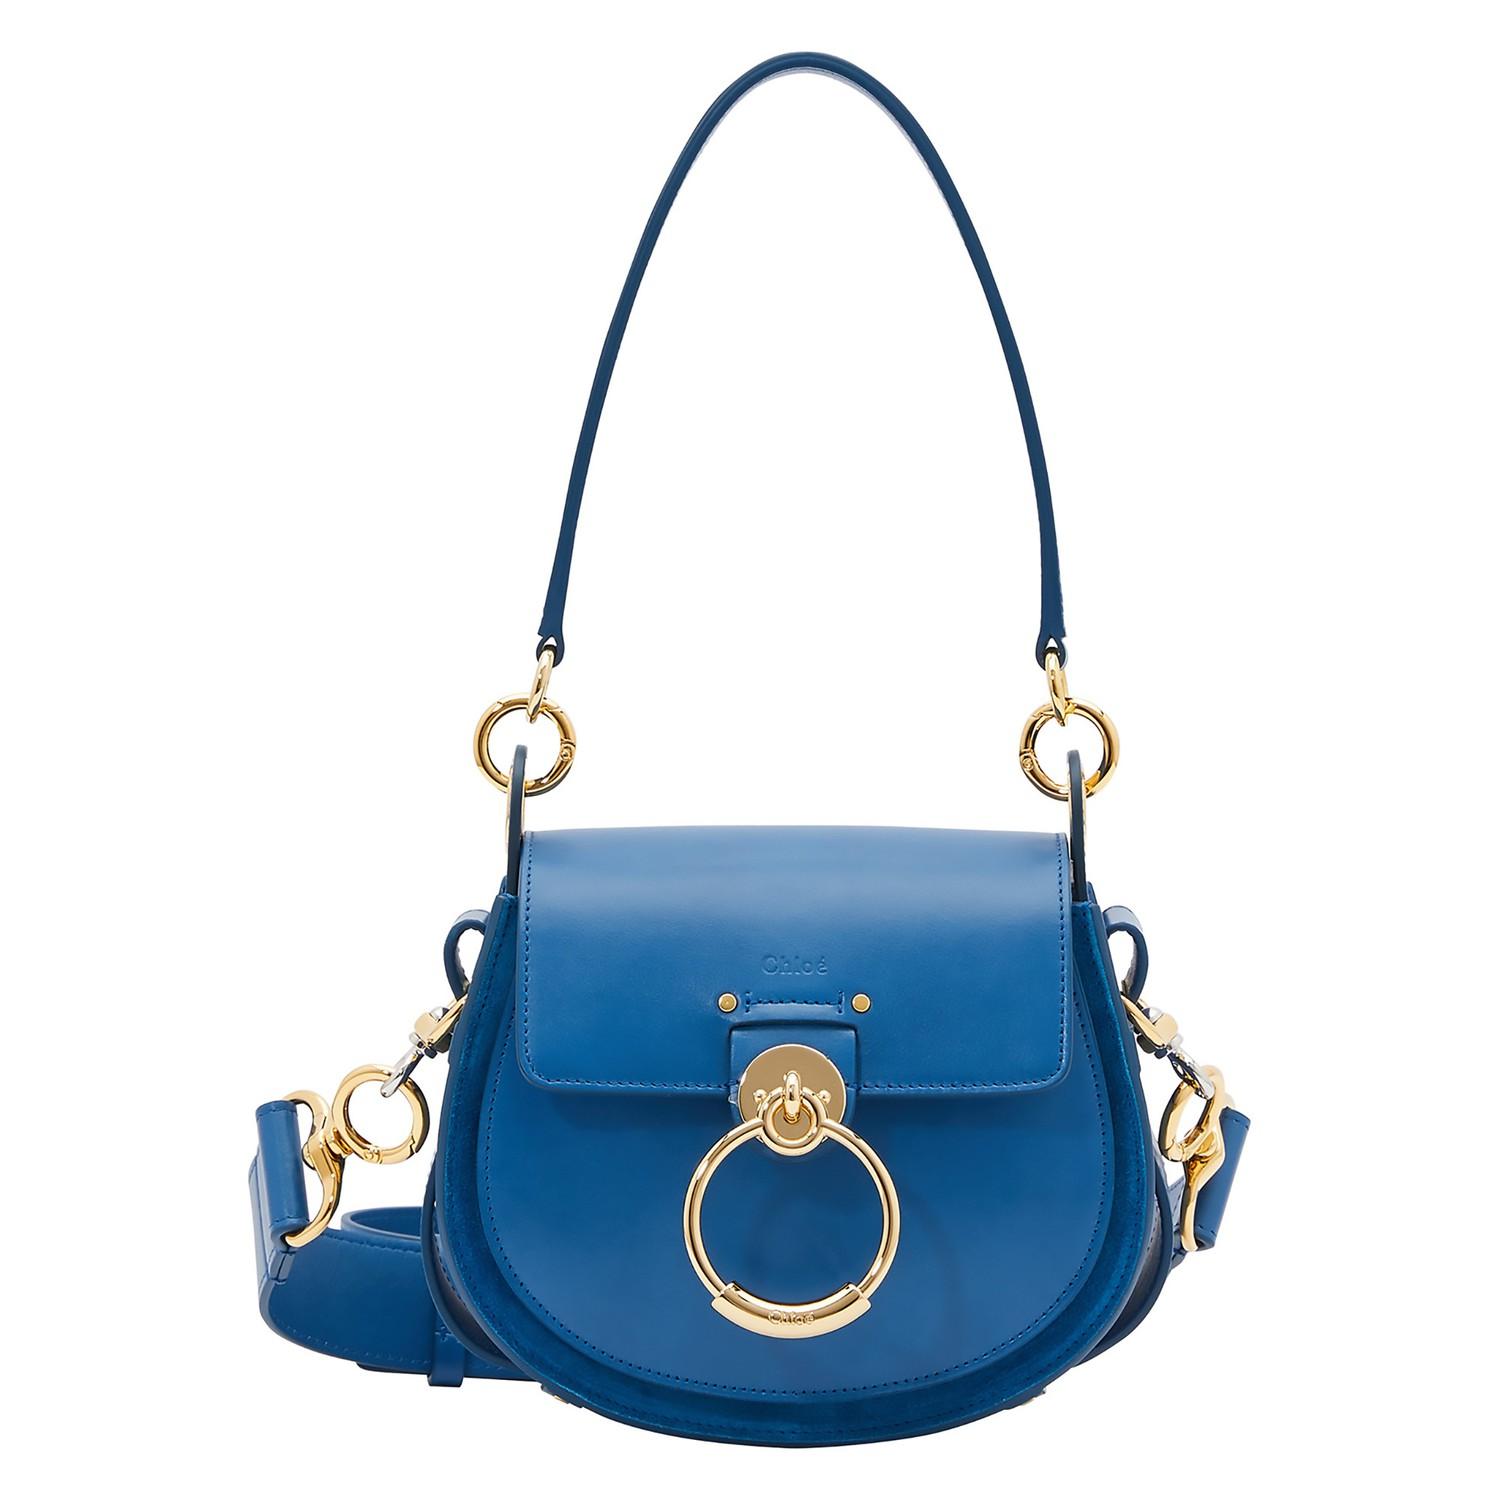 Chloé Leather Small Tess Shiny Calfskin Shoulder Bag in Blue - Save 41% ...